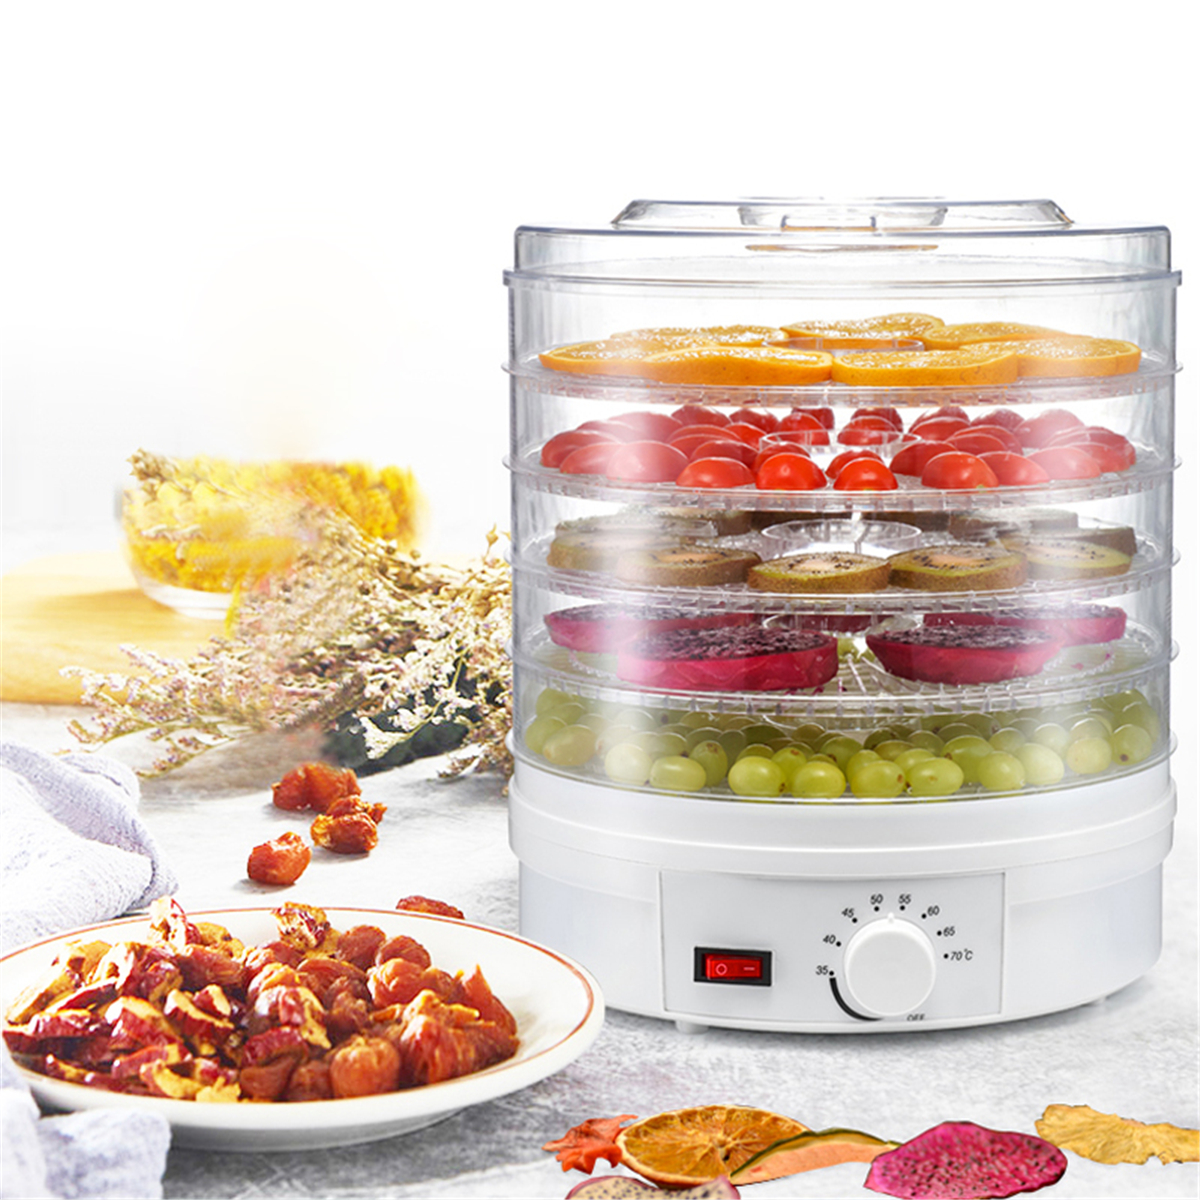 110V 350W 5 Trays Food Vegetable Dehydrator Fruit Meat Dryer Drying Machine 9